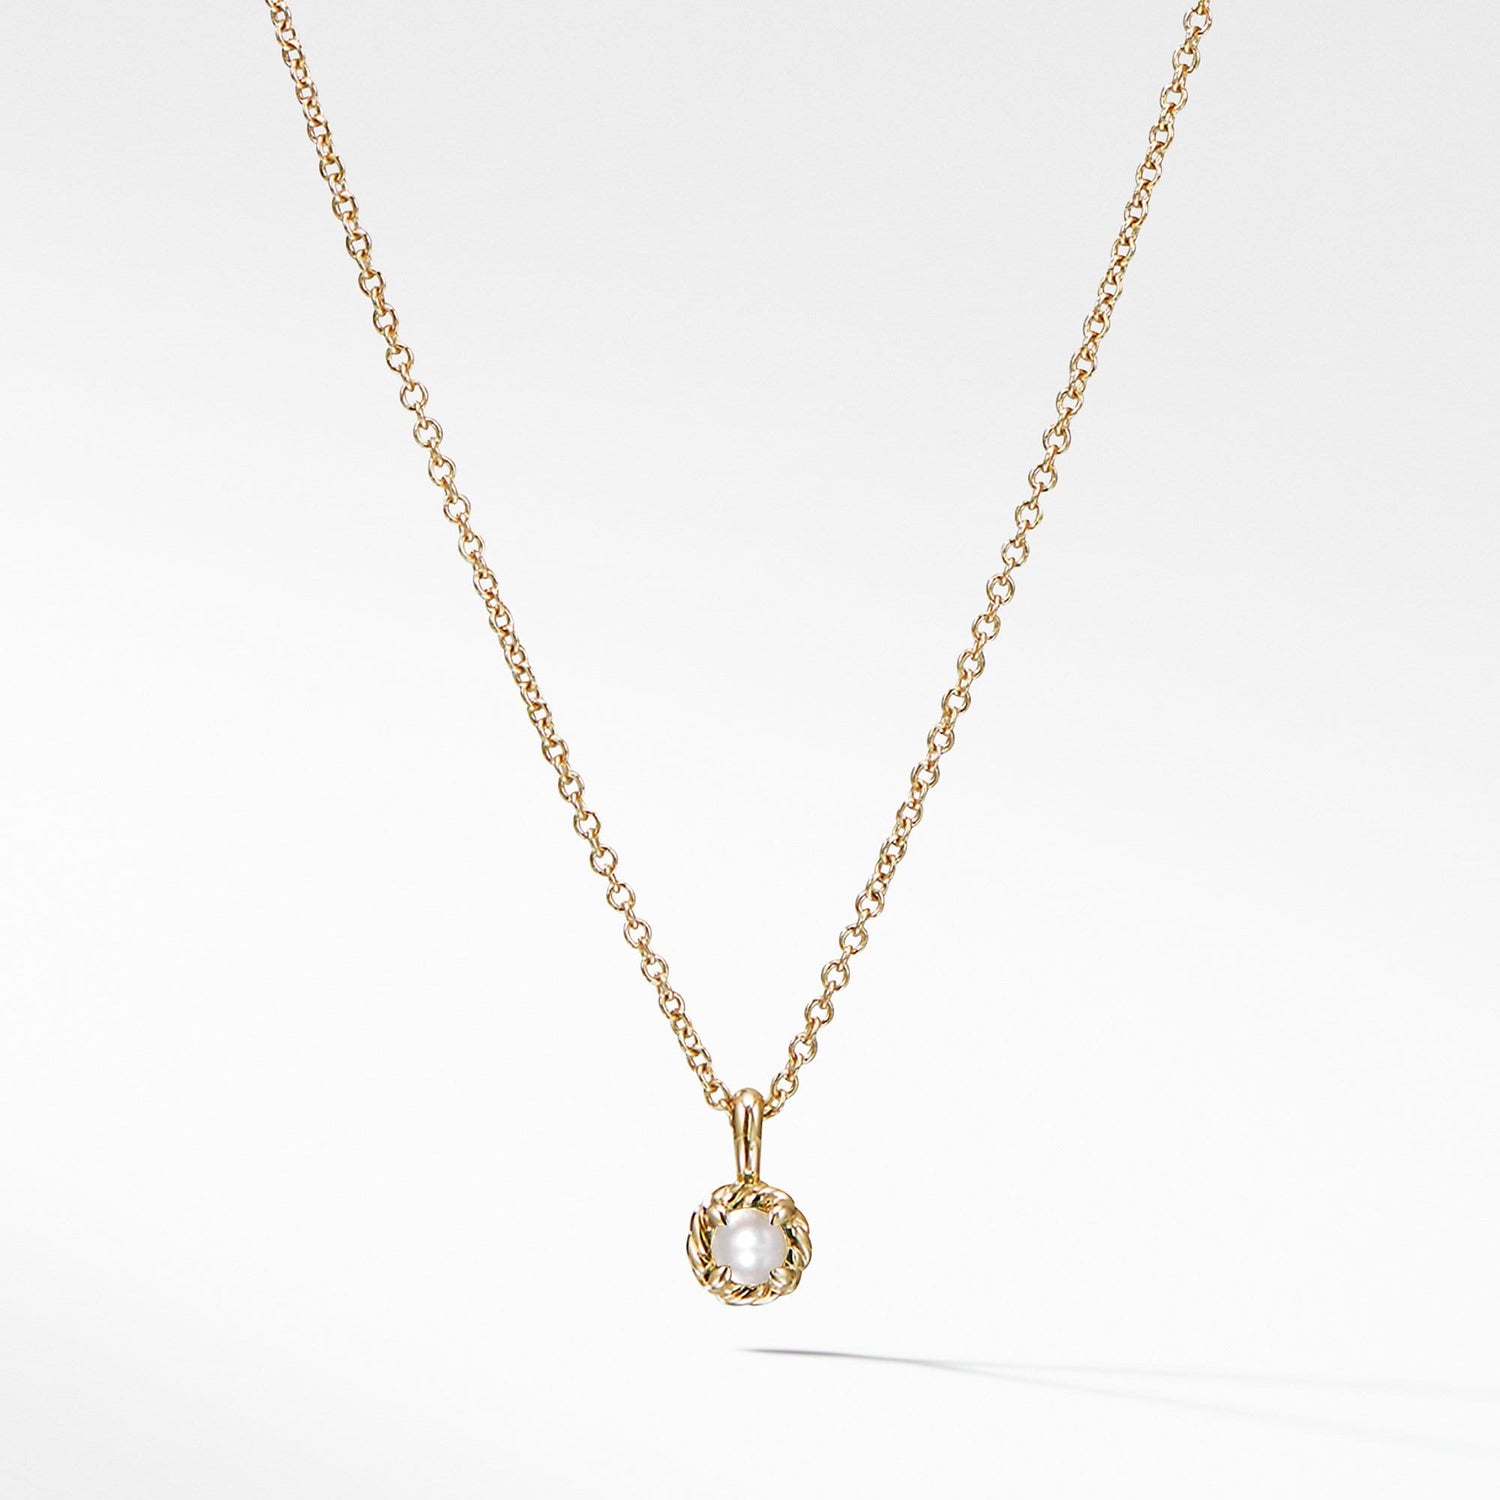 Cable Collectibles Kids Necklace Birthstone Necklace with Cultured freshwater Pearls in 18K Gold, 3mm - David Yurman- Diamond Cellar